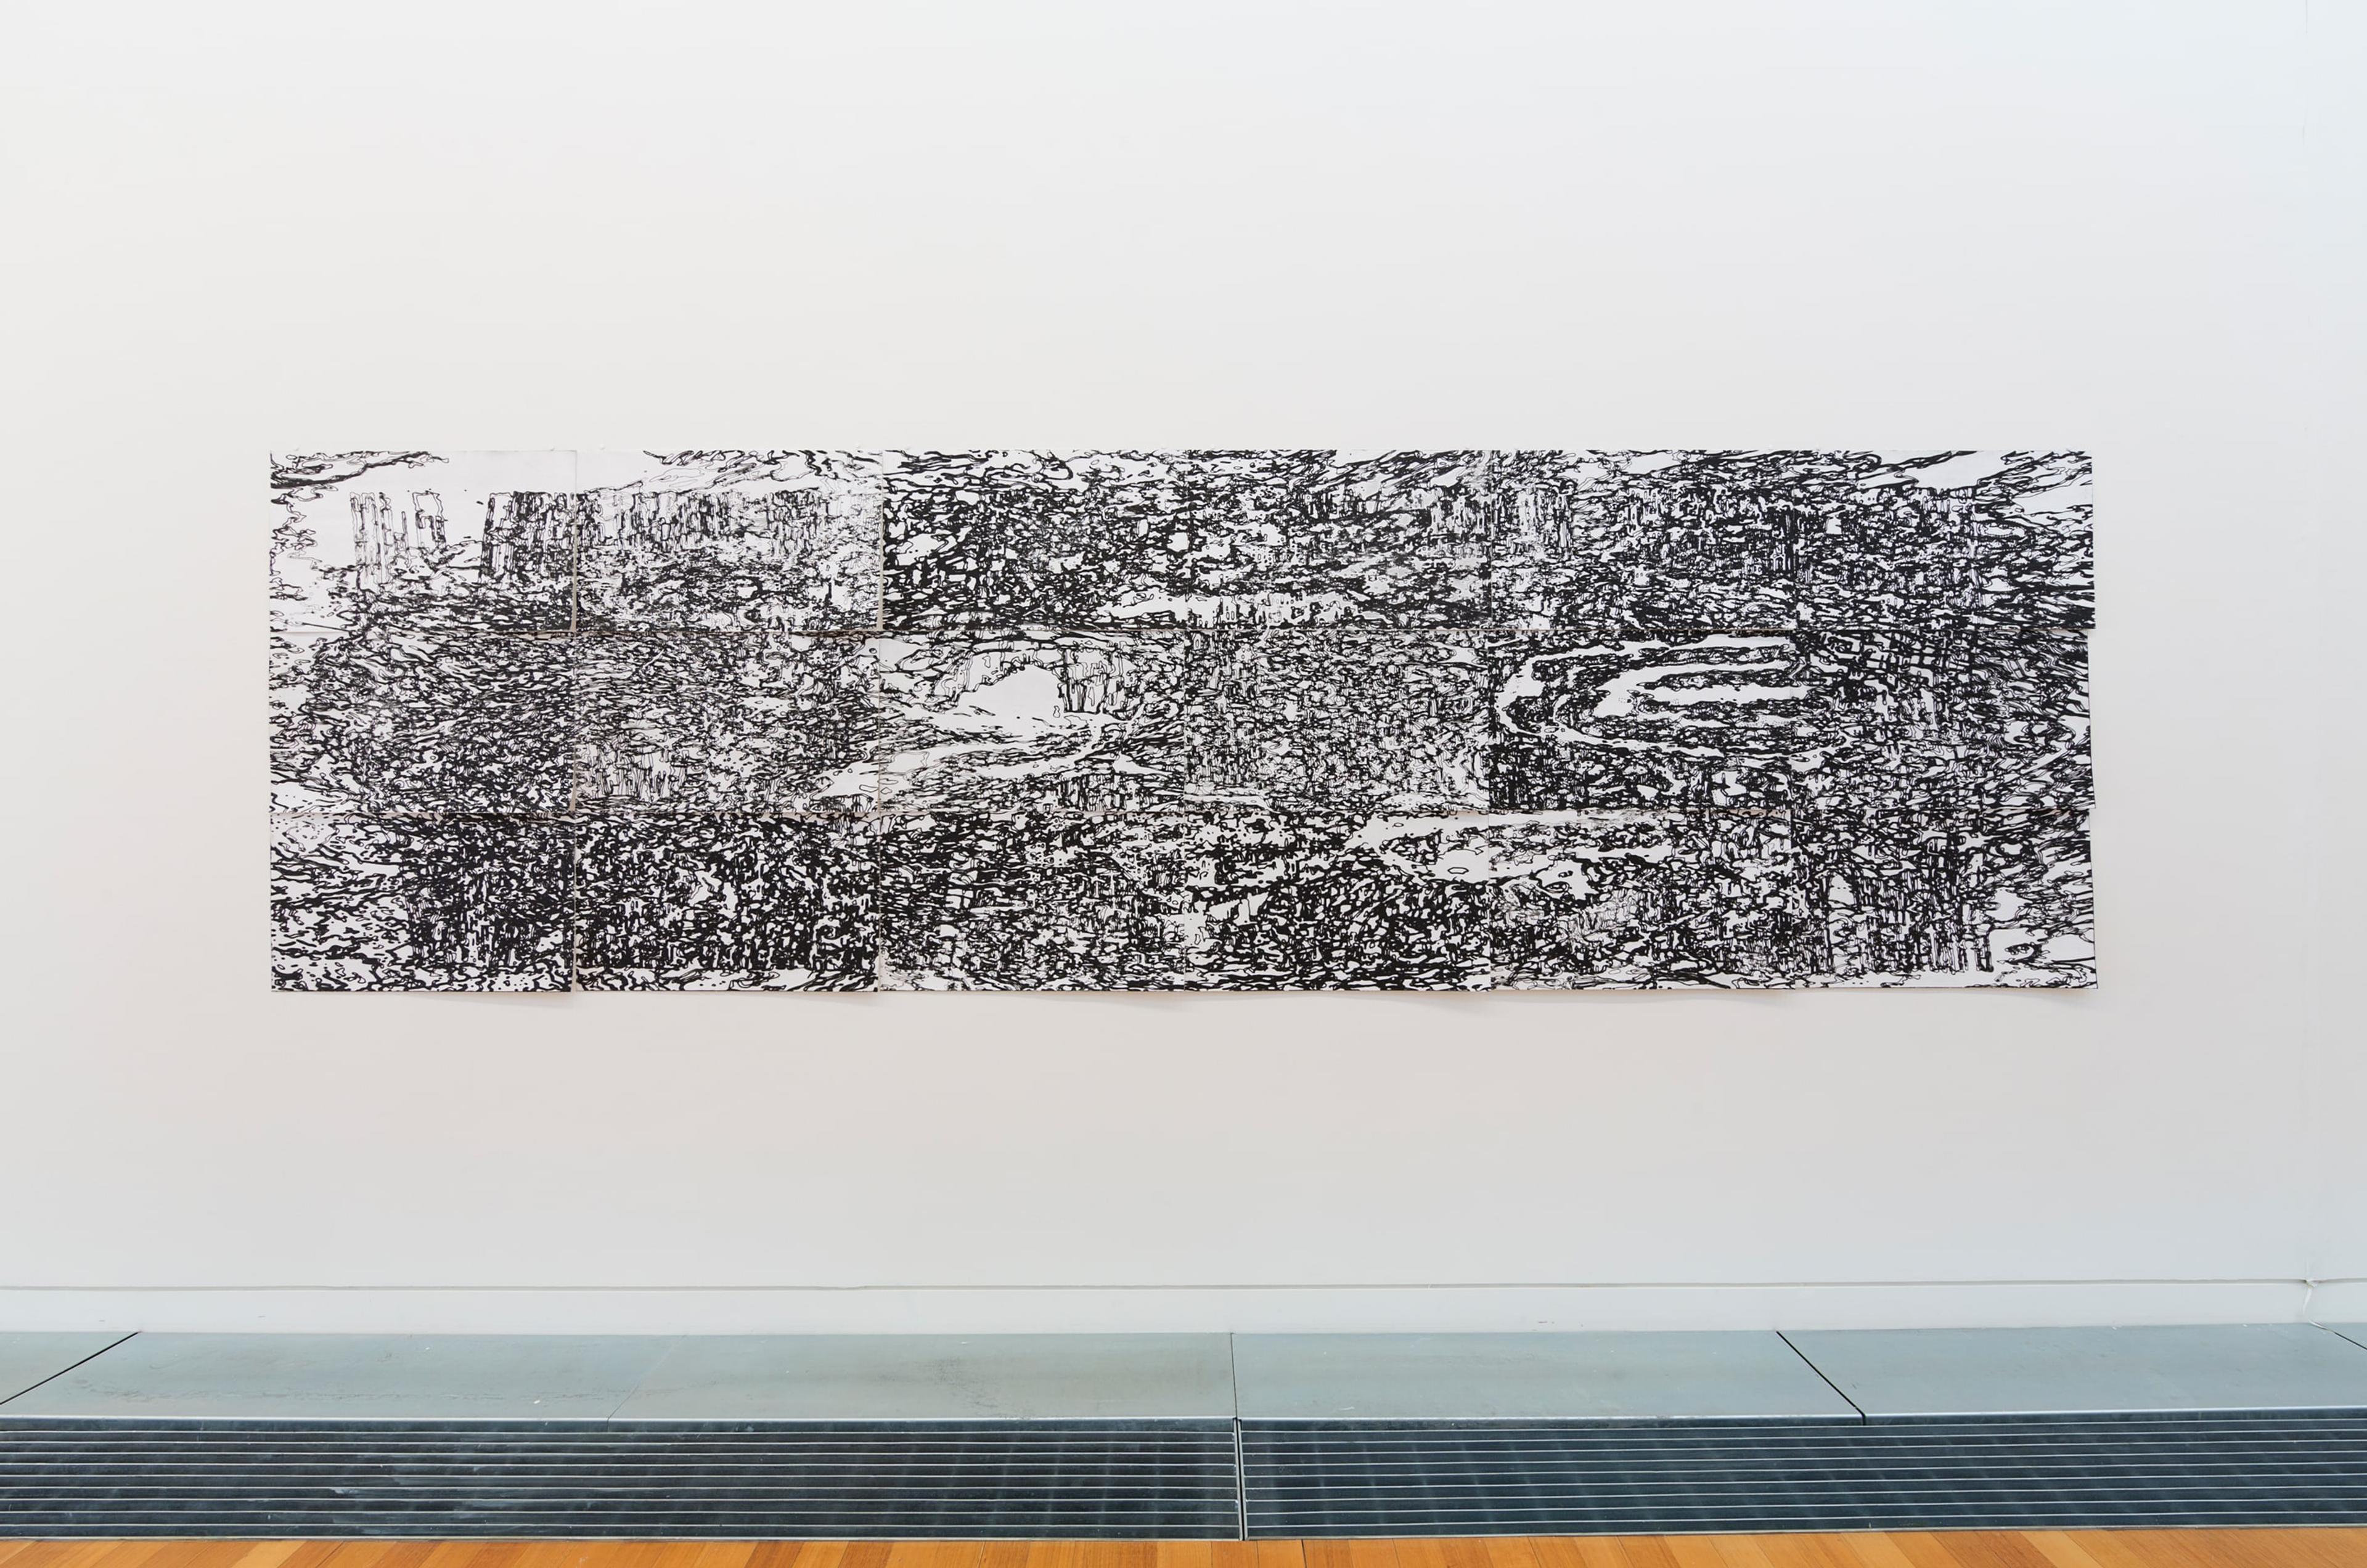 Sarah Treadwell, Oceanic Foundations: Rising Water 1, 2014, mixed media on unstretched canvas, in the exhibition Drawing Is/Not Building at the Adam Art Gallery Te Pātaka Toi, Victoria University of Wellington (photo: Shaun Waugh)